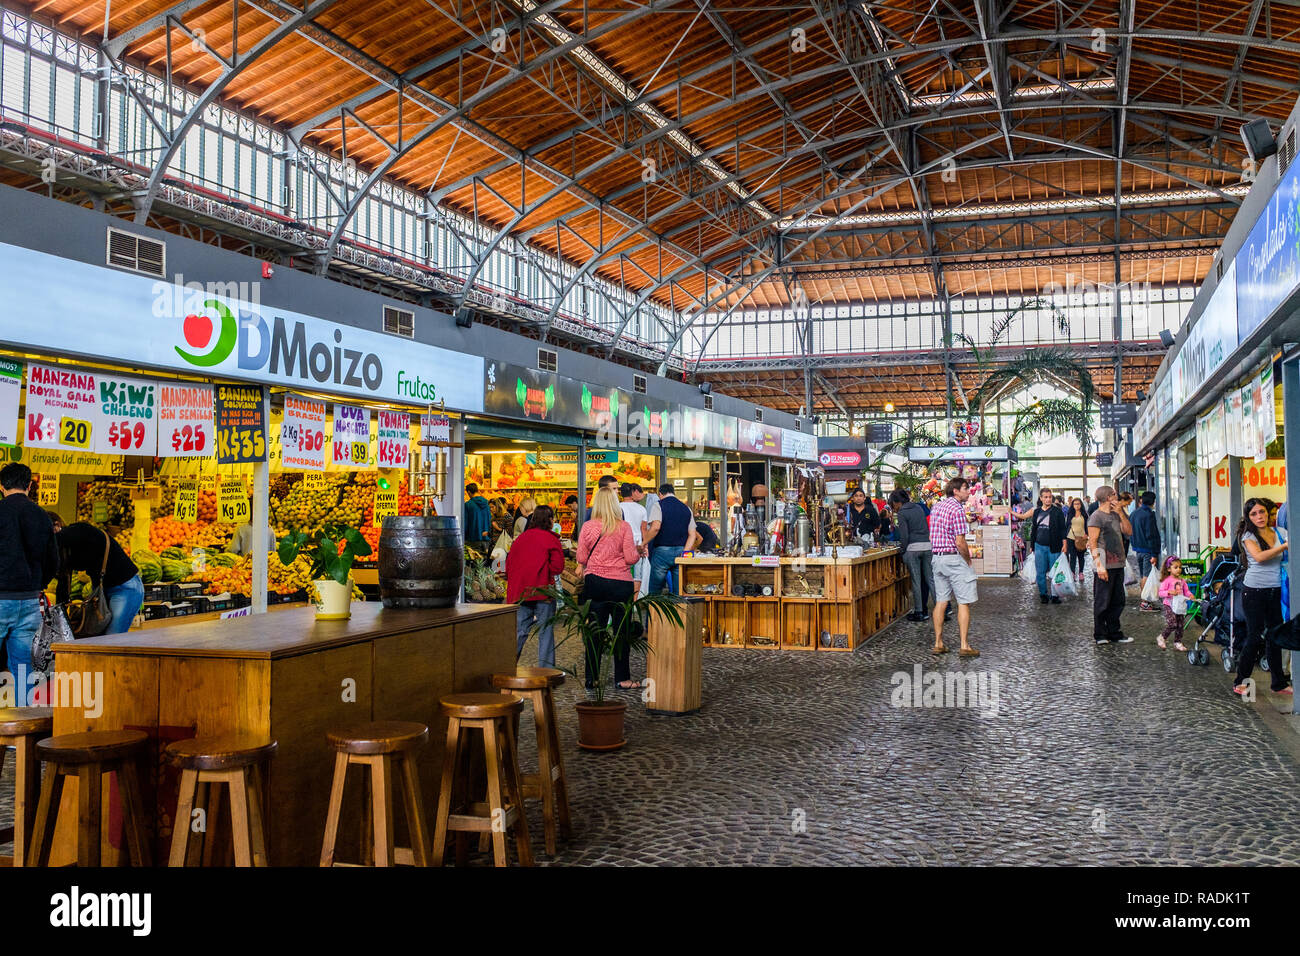 Uruguay: Montevideo. Building of the Mercado Agrícola (Montevideo market) created in 1913 and registered as a National Historic Landmark. Here, custom Stock Photo